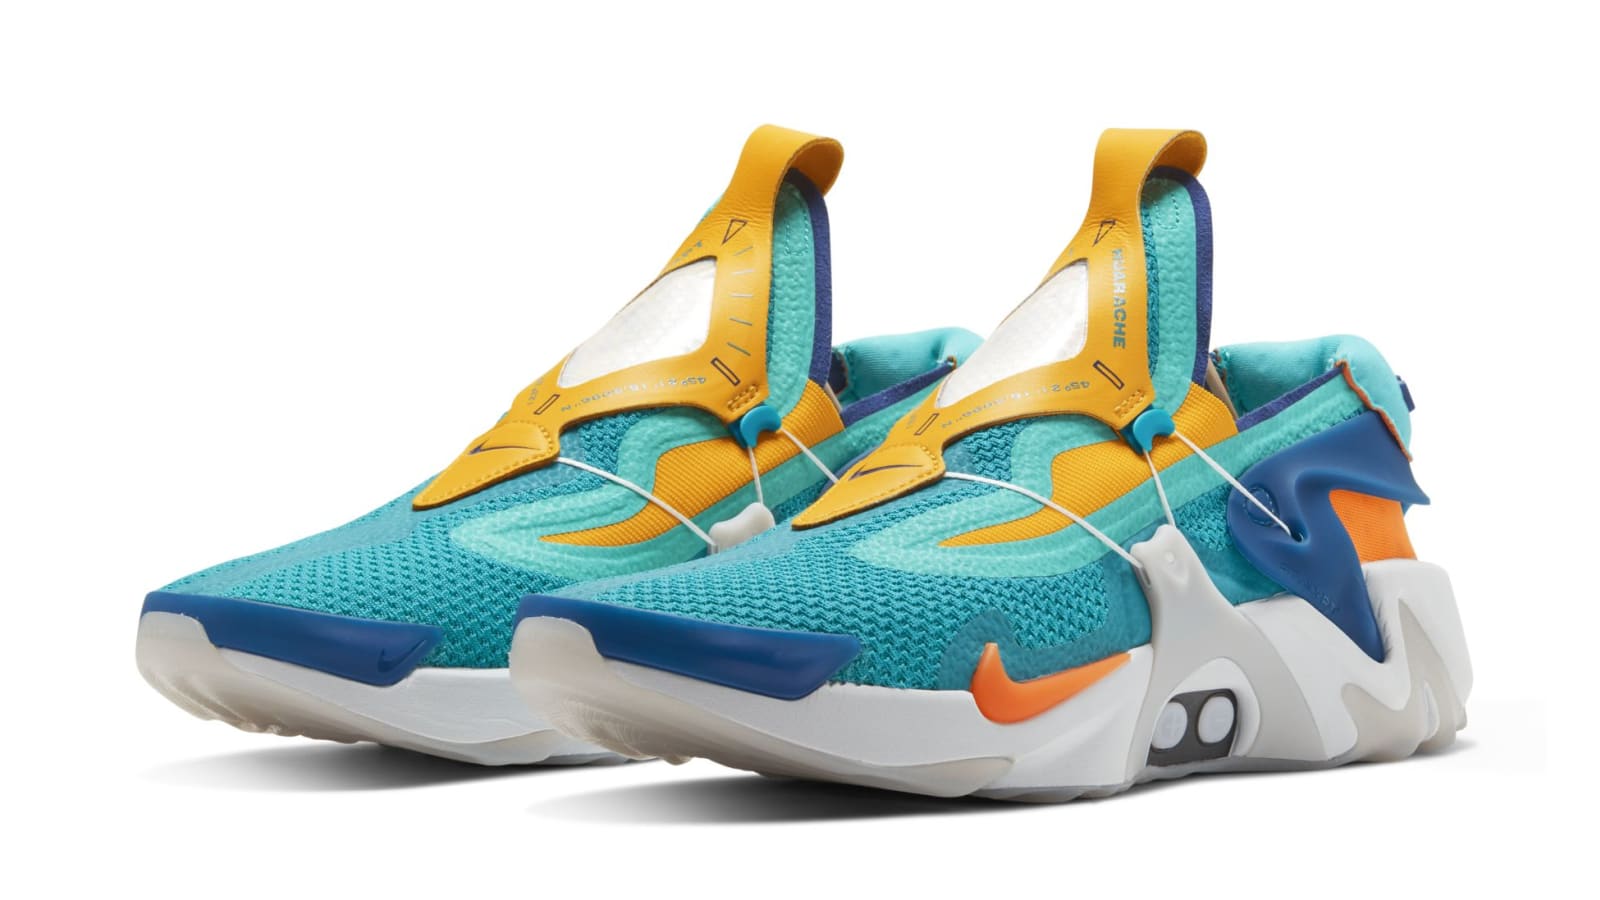 Nike Adapt Huarache Updated With Vibrant New Colorway: Official Photos